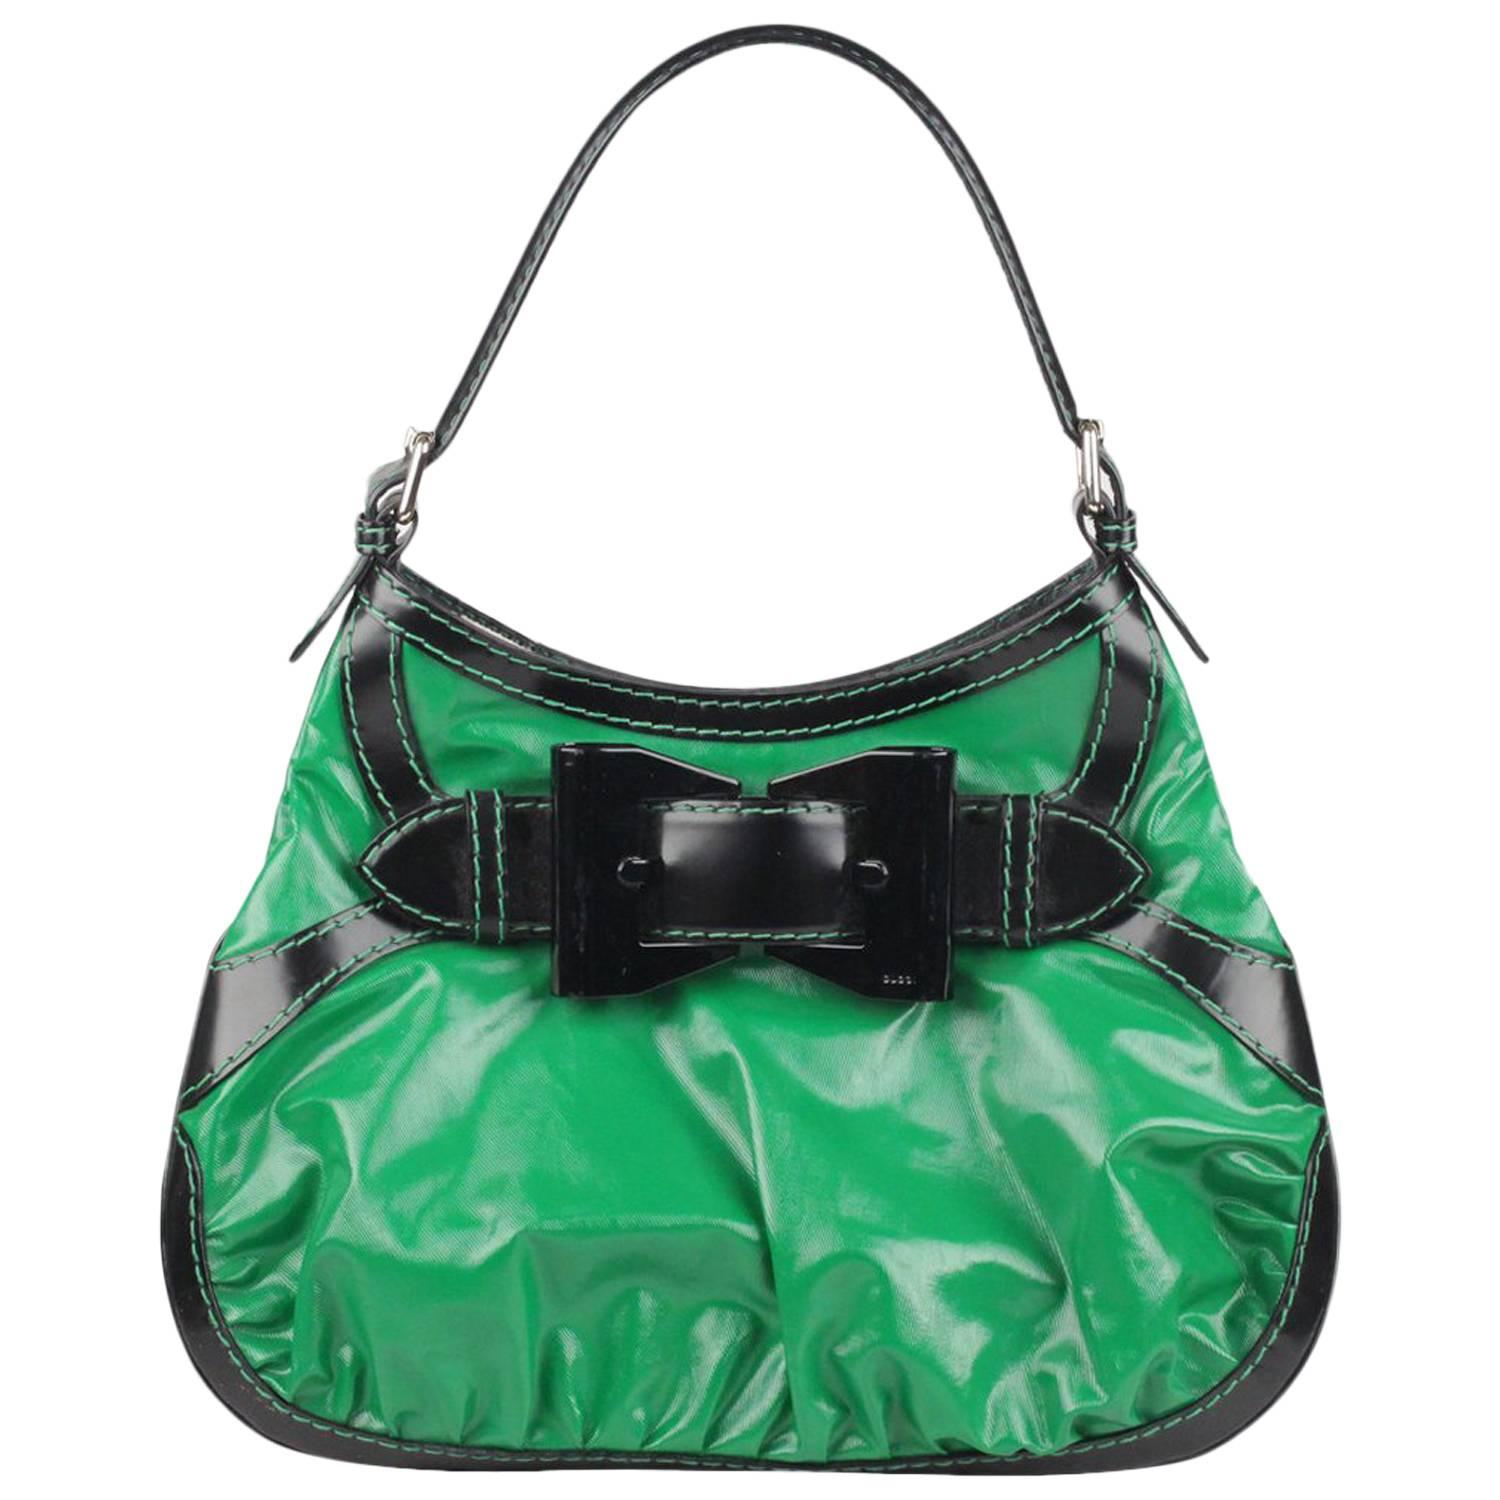 GUCCI Green and Black Dialux Coated Canvas Queen Hobo Bag